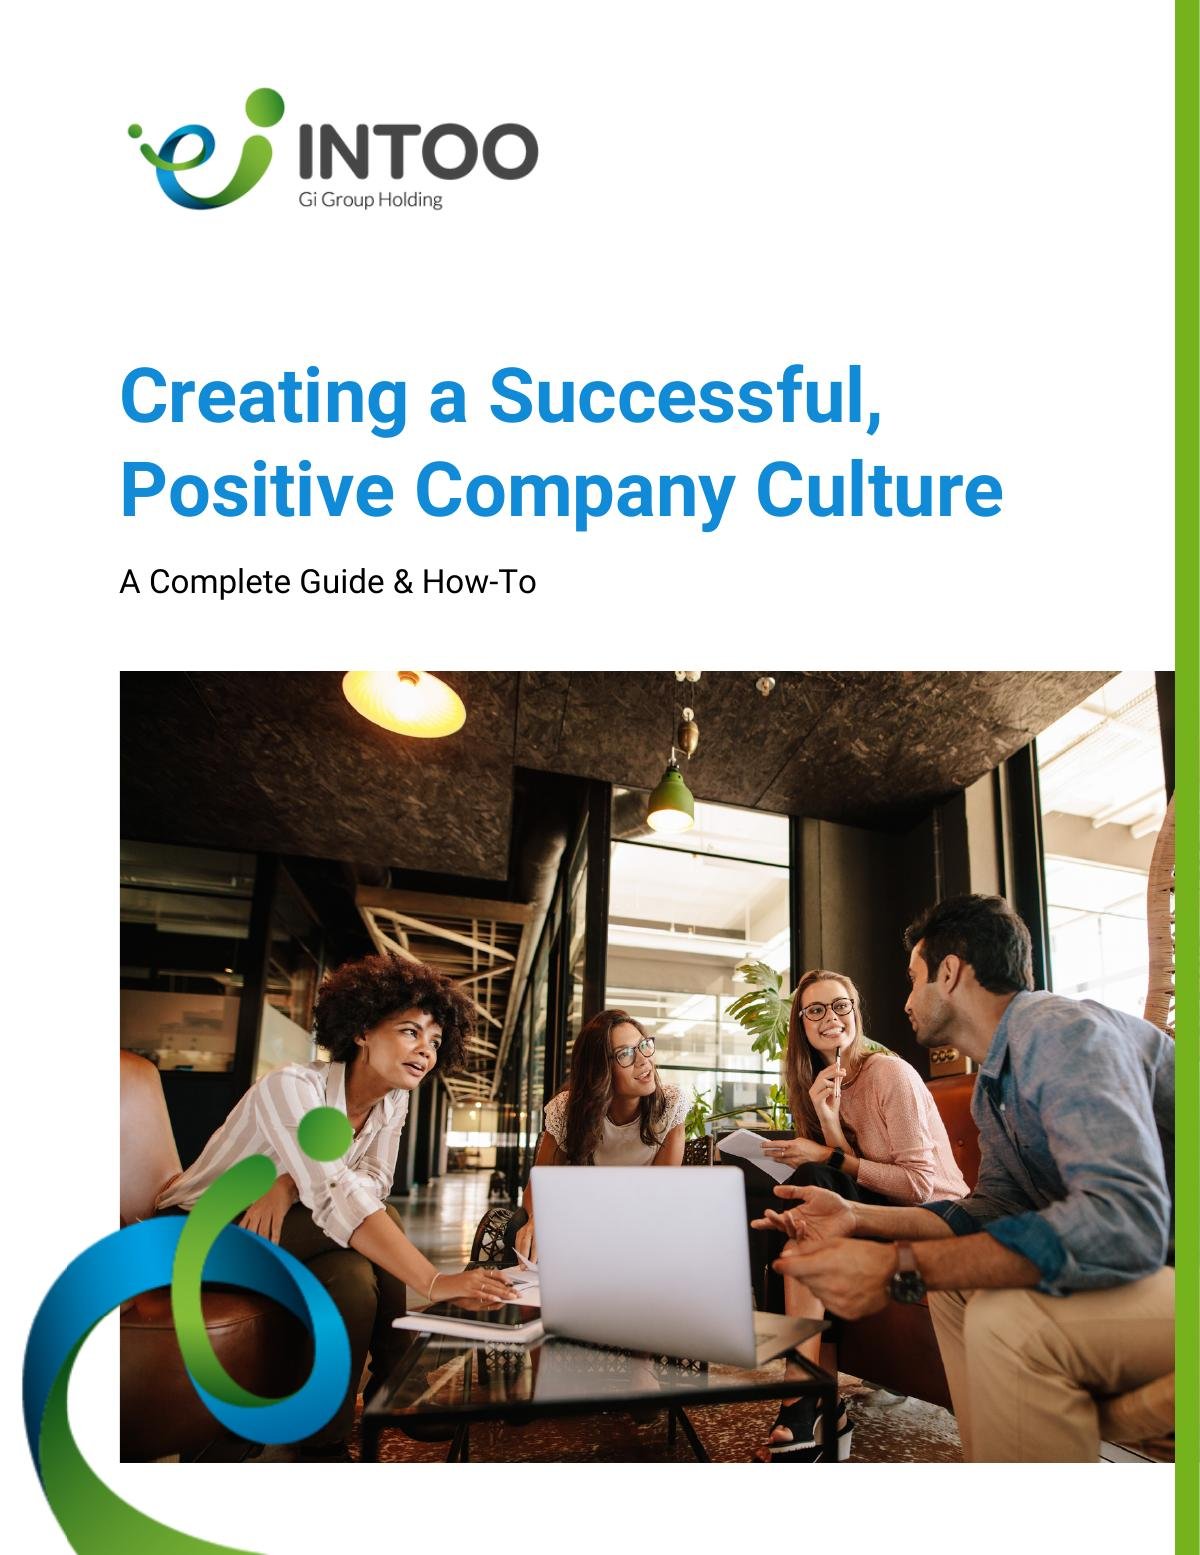 Complete Guide: 5 tips for creating a successful Positive Company Culture